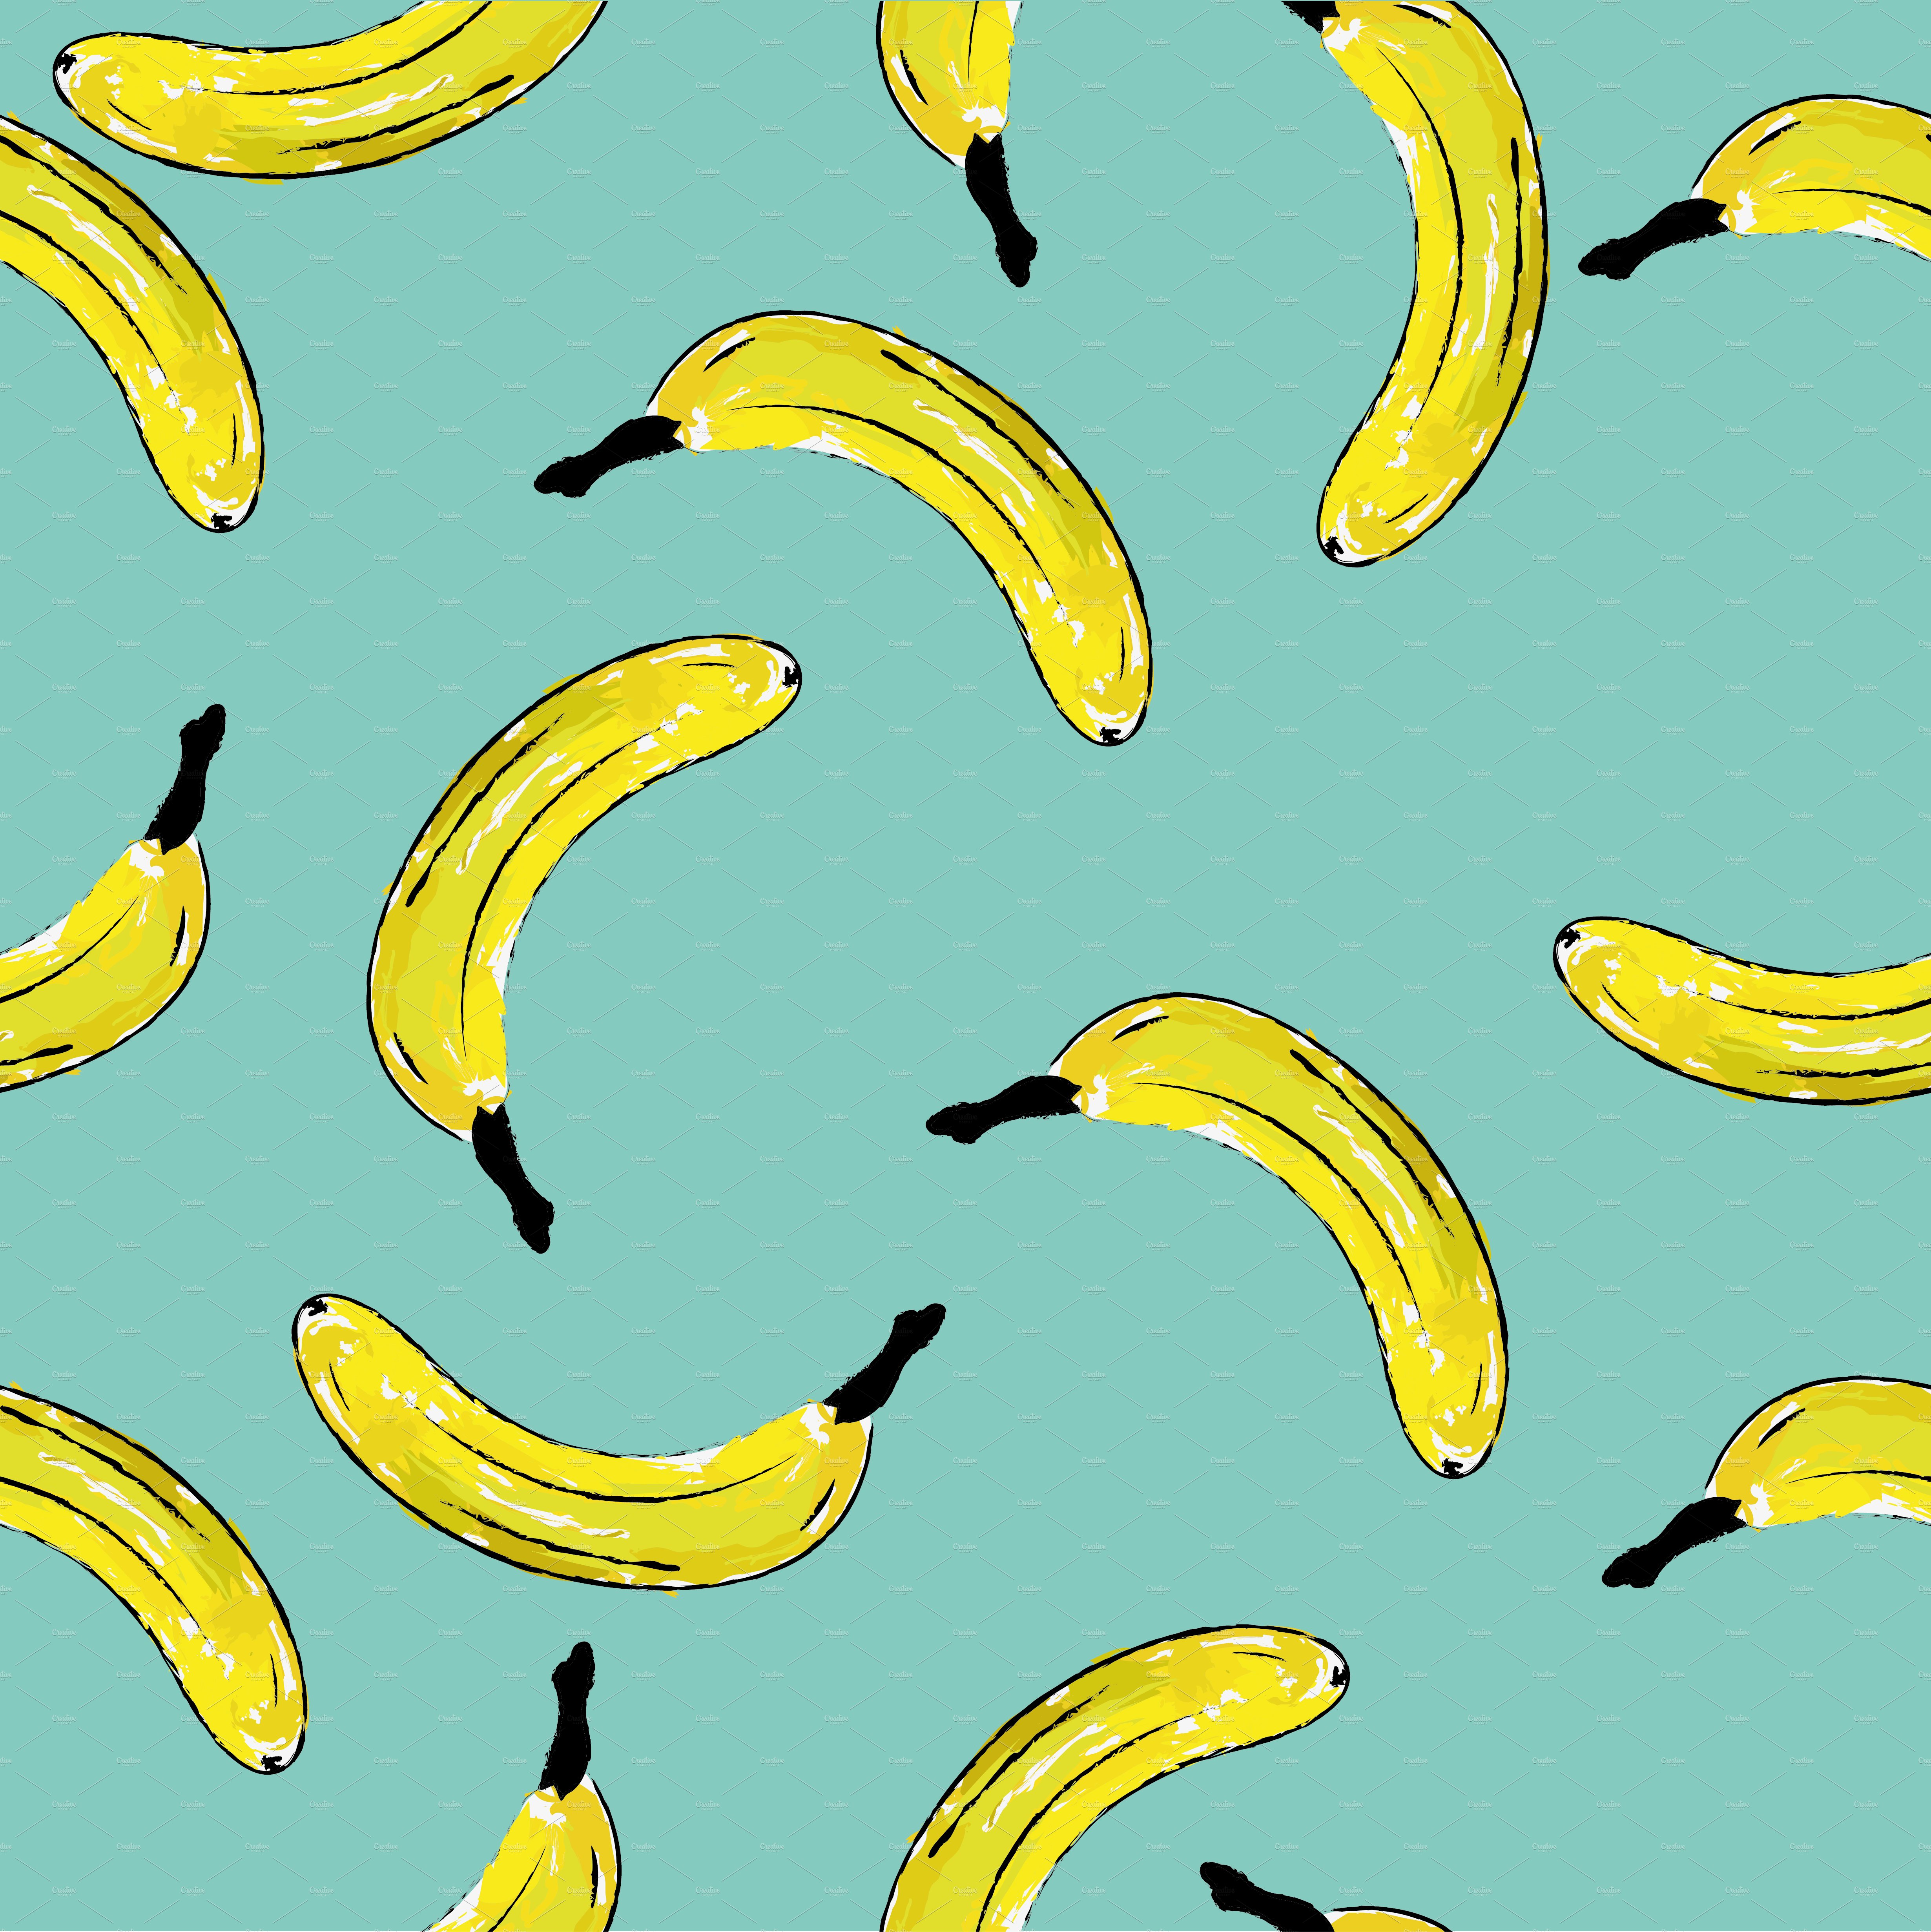 background with watercolor banana cover image.